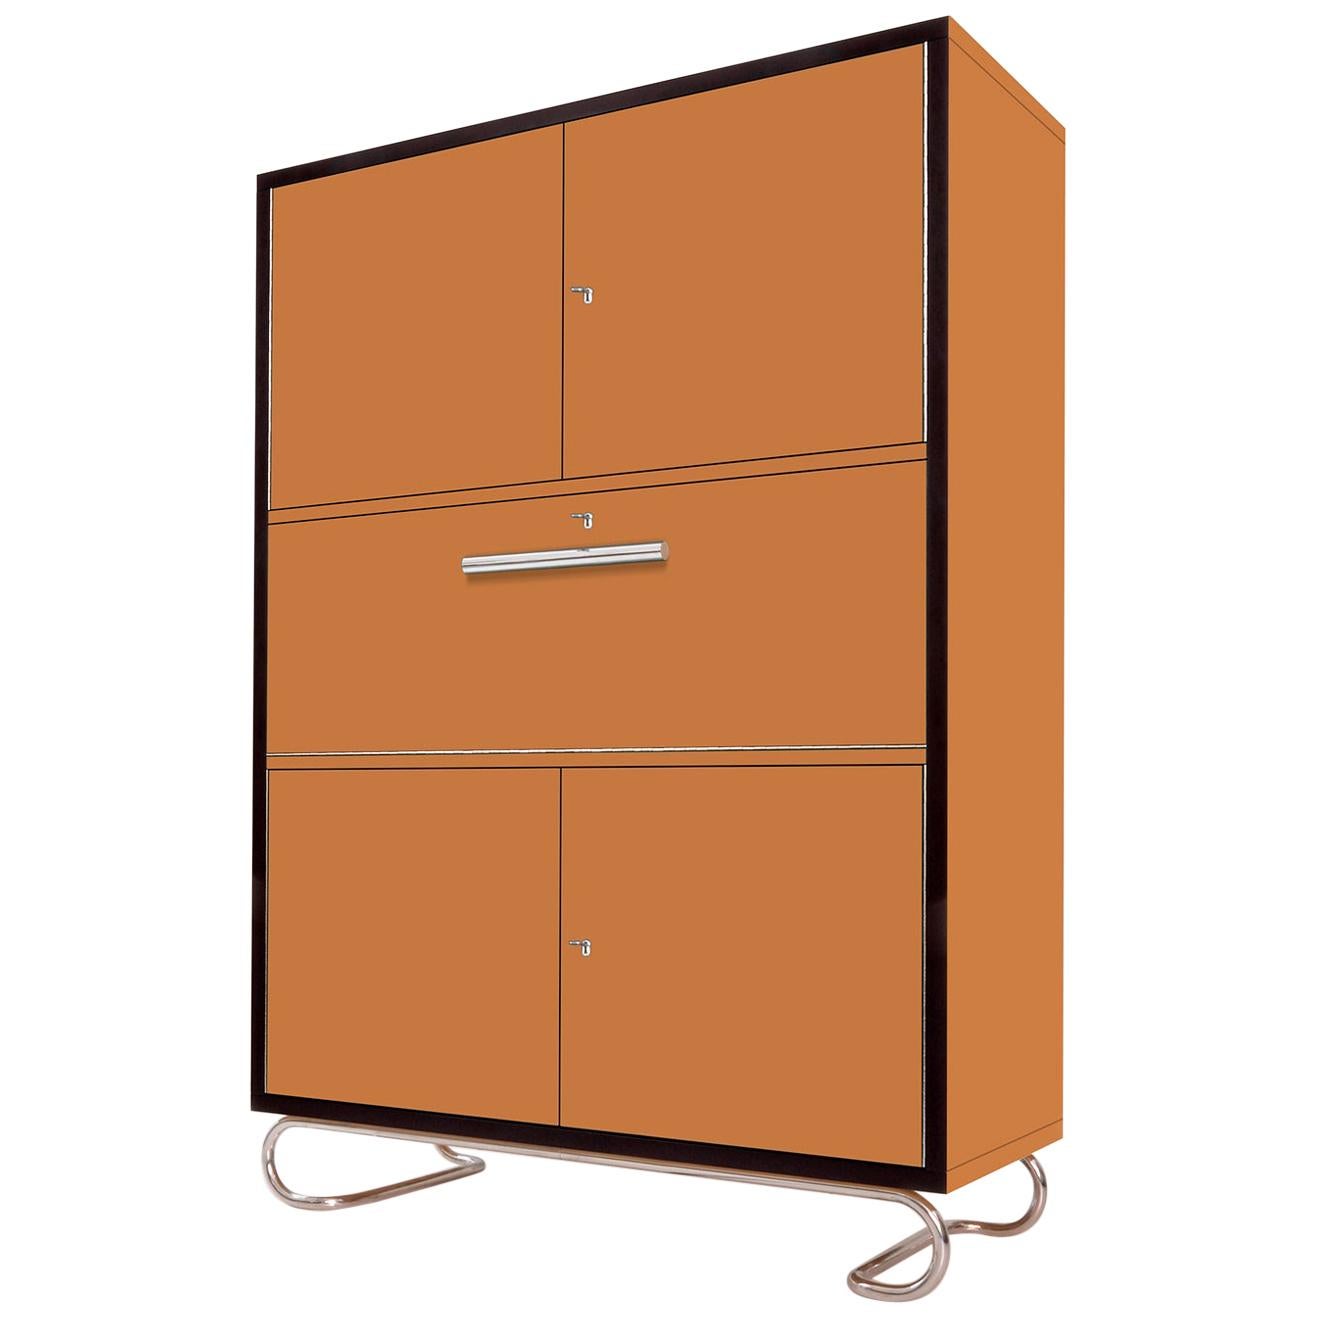 Modernist Secretary Cabinet, Lacquered Wood, Chrome-Plated Metal, Customizable